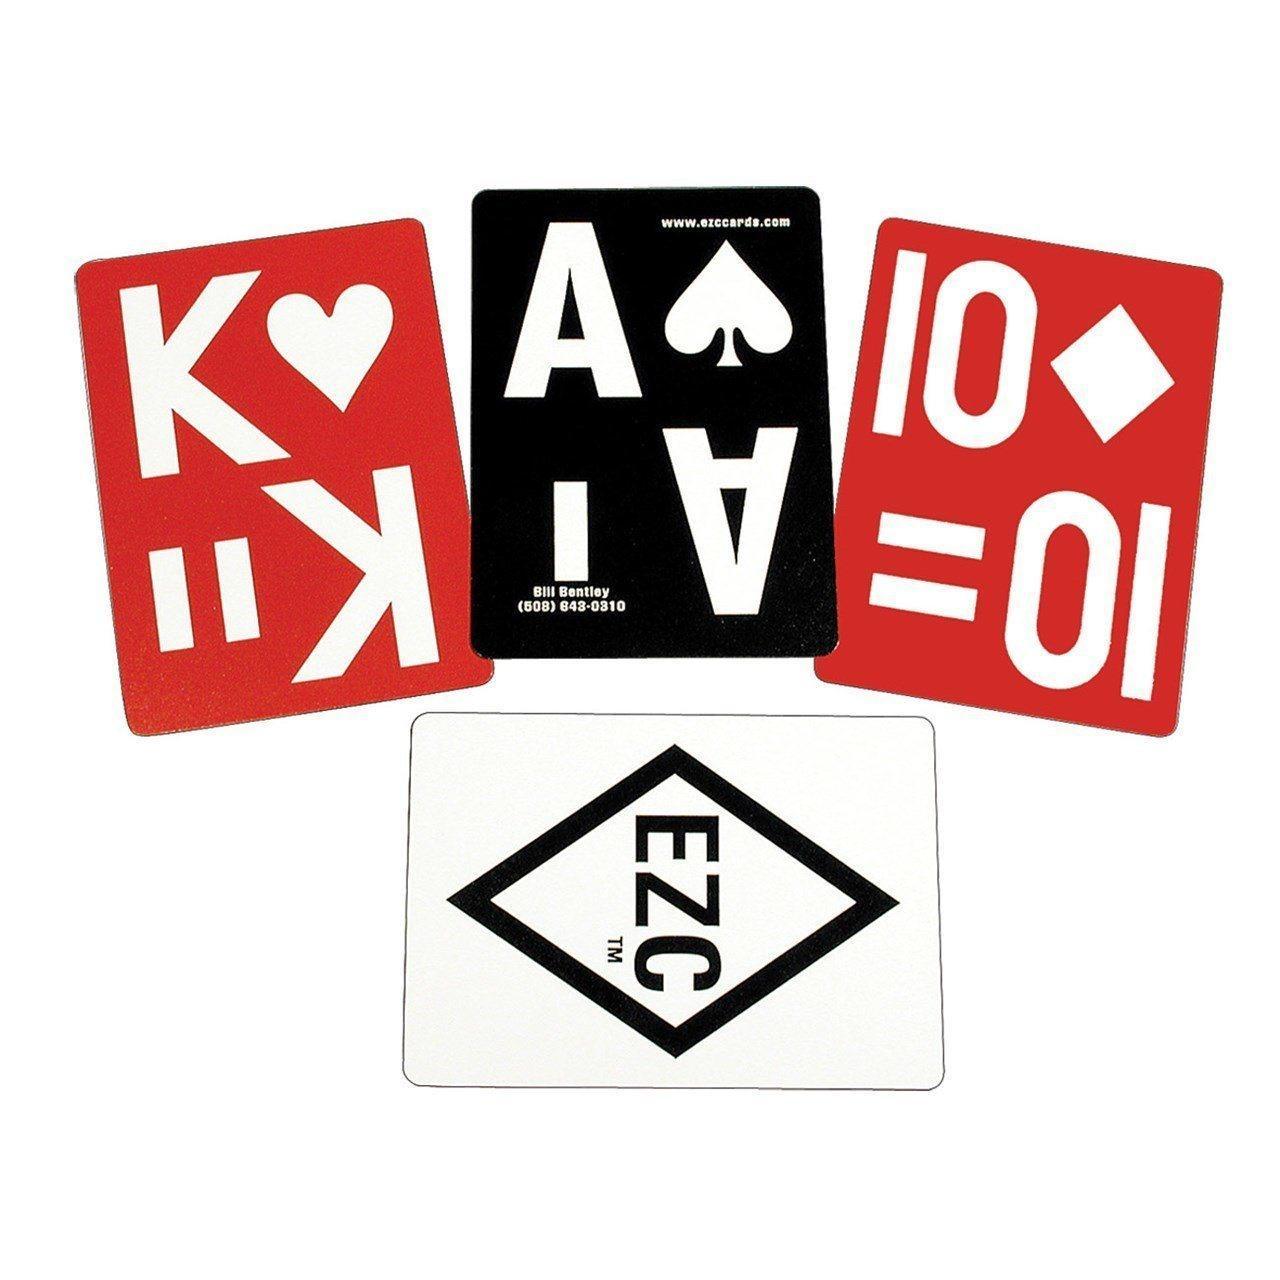 EZC Playing cards - The Low Vision Store